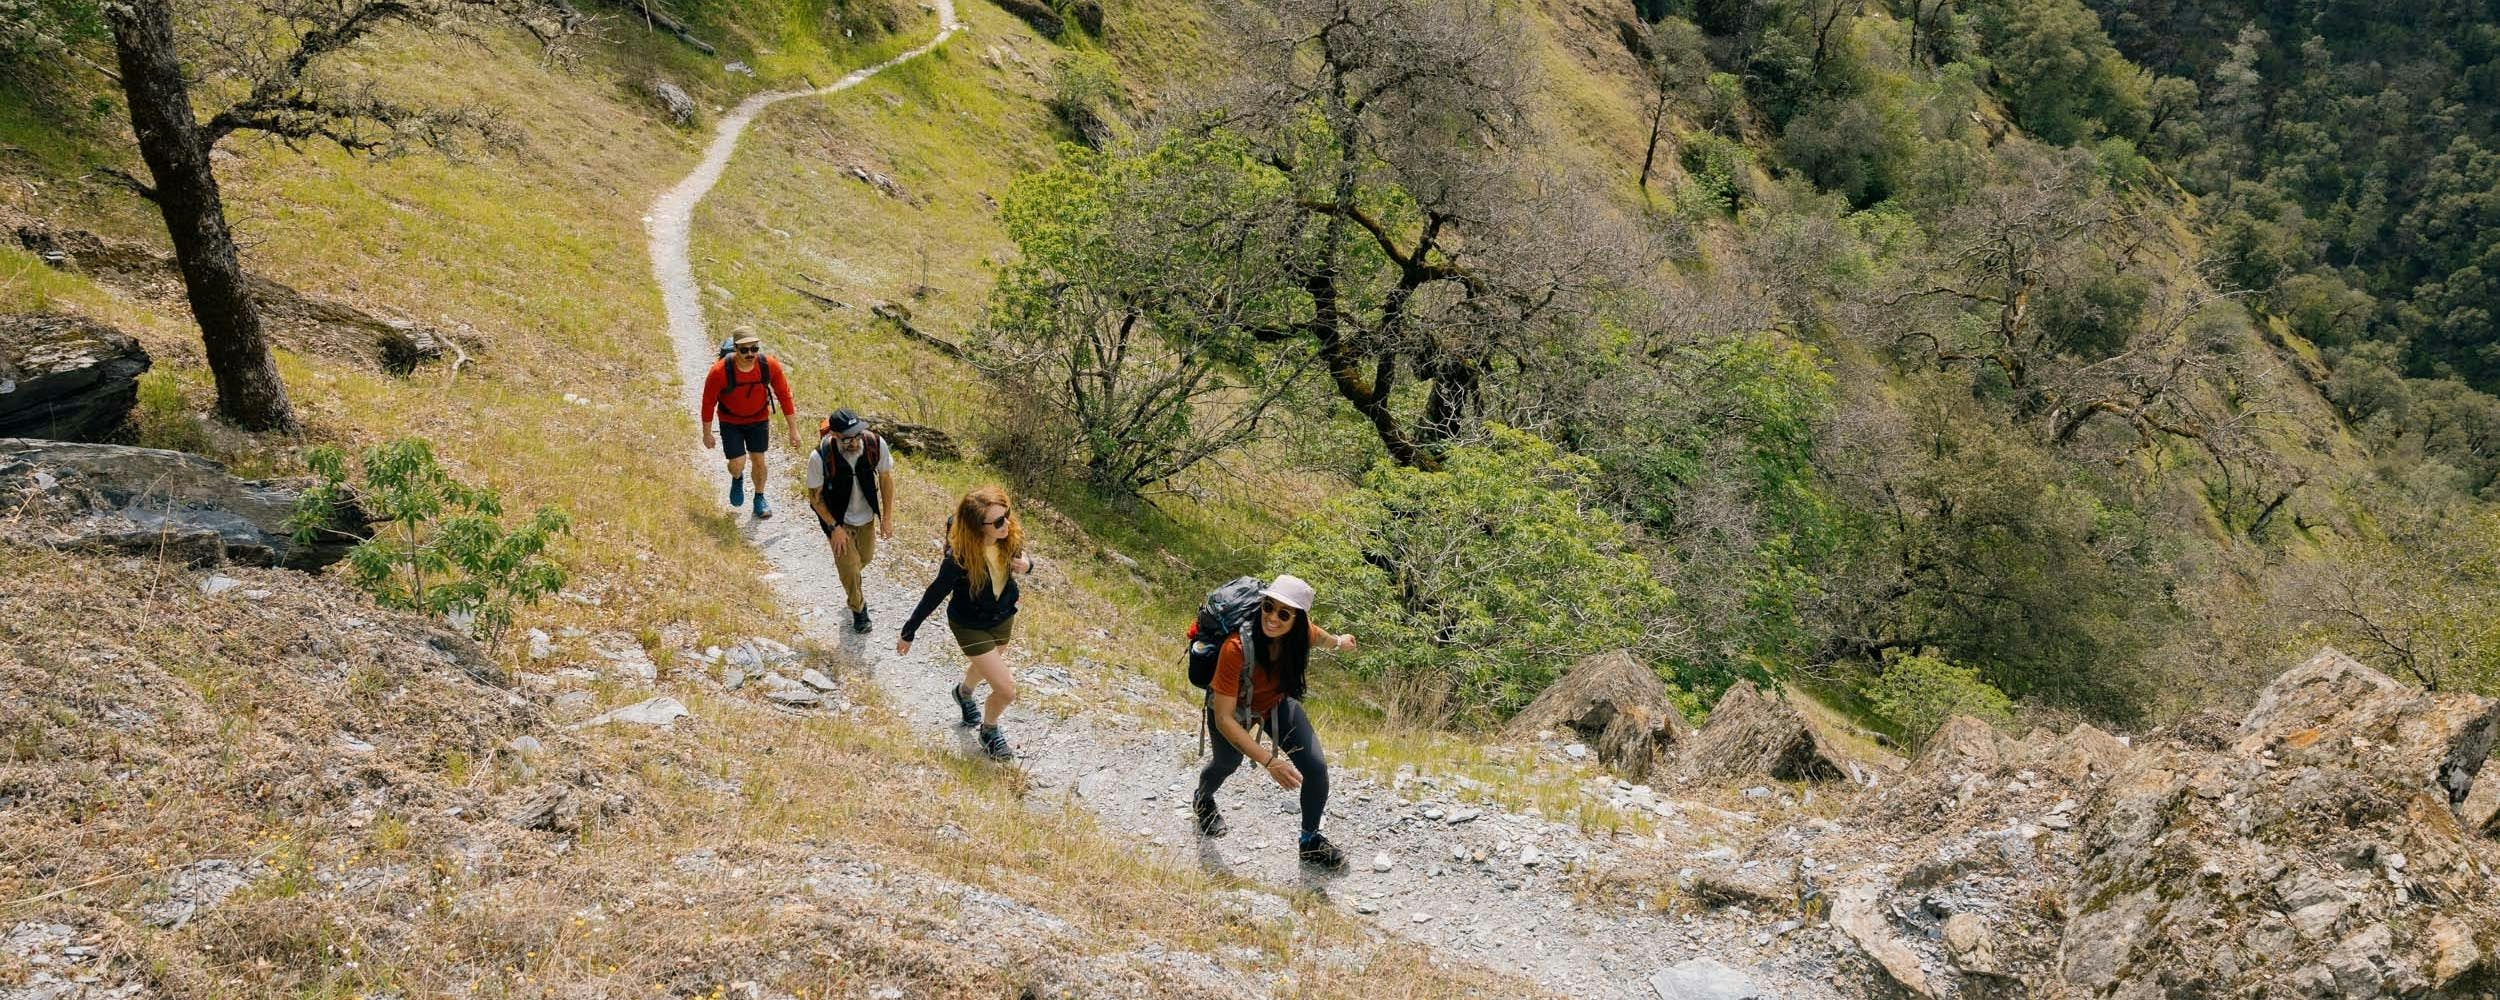 Four people hiking uphill on a path